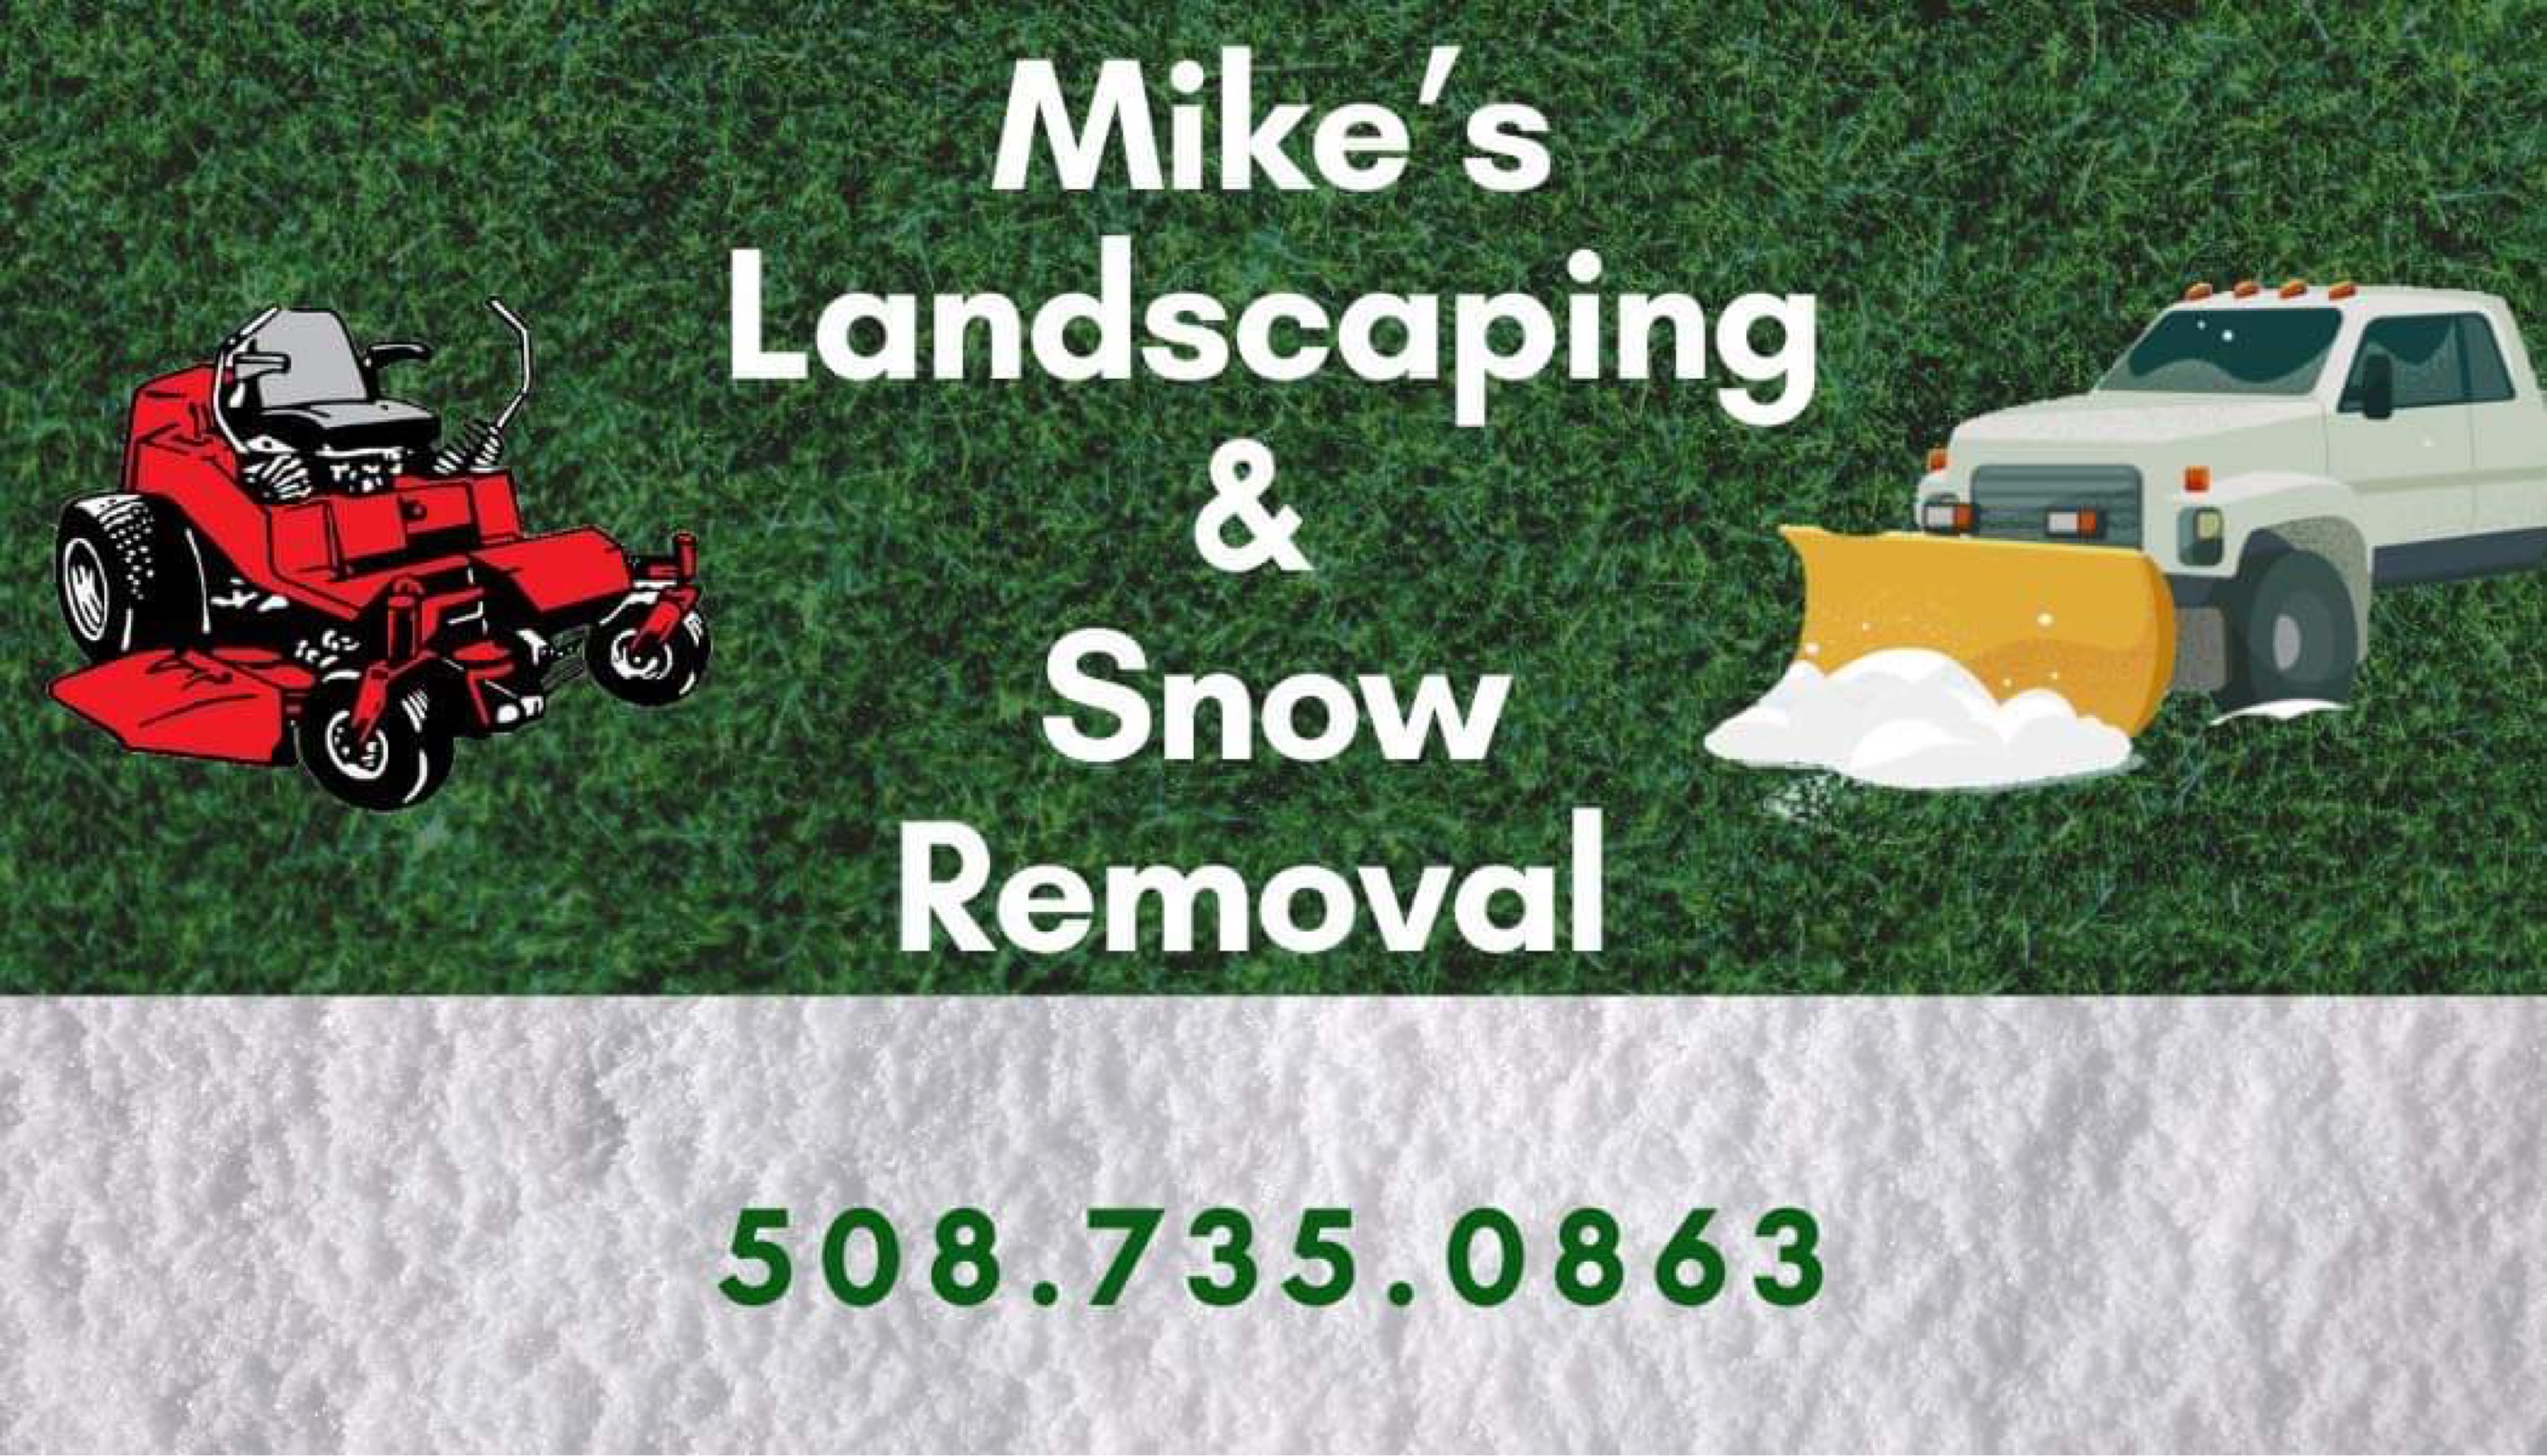 Mikes Landscaping and Snow Removal Logo